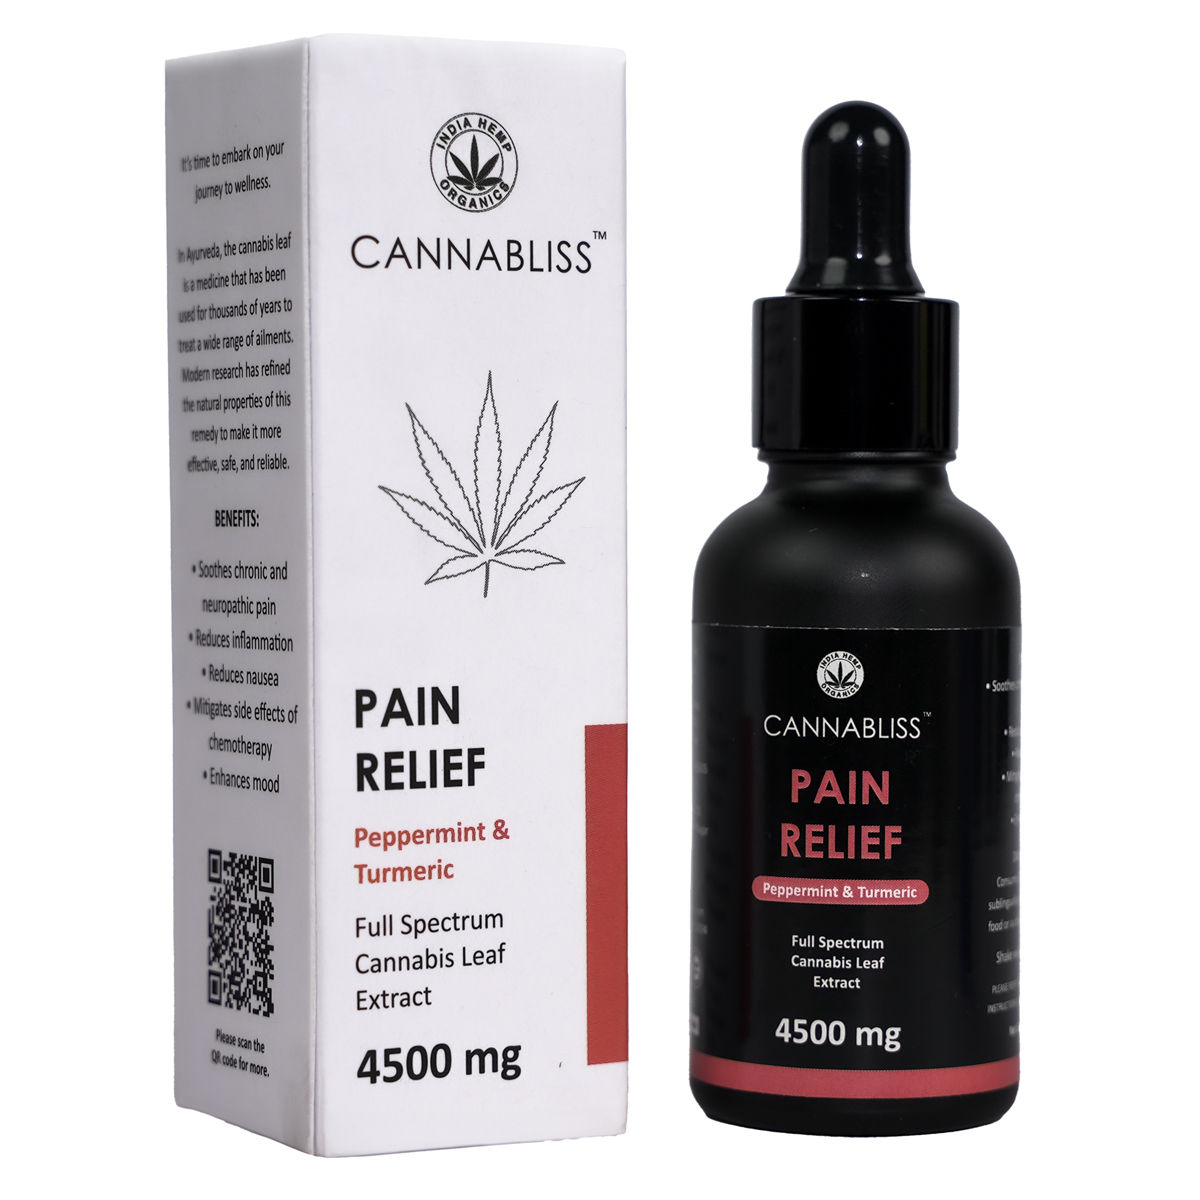 Buy Cannabliss Pain Relief 4500 mg Oil, 30 ml Online